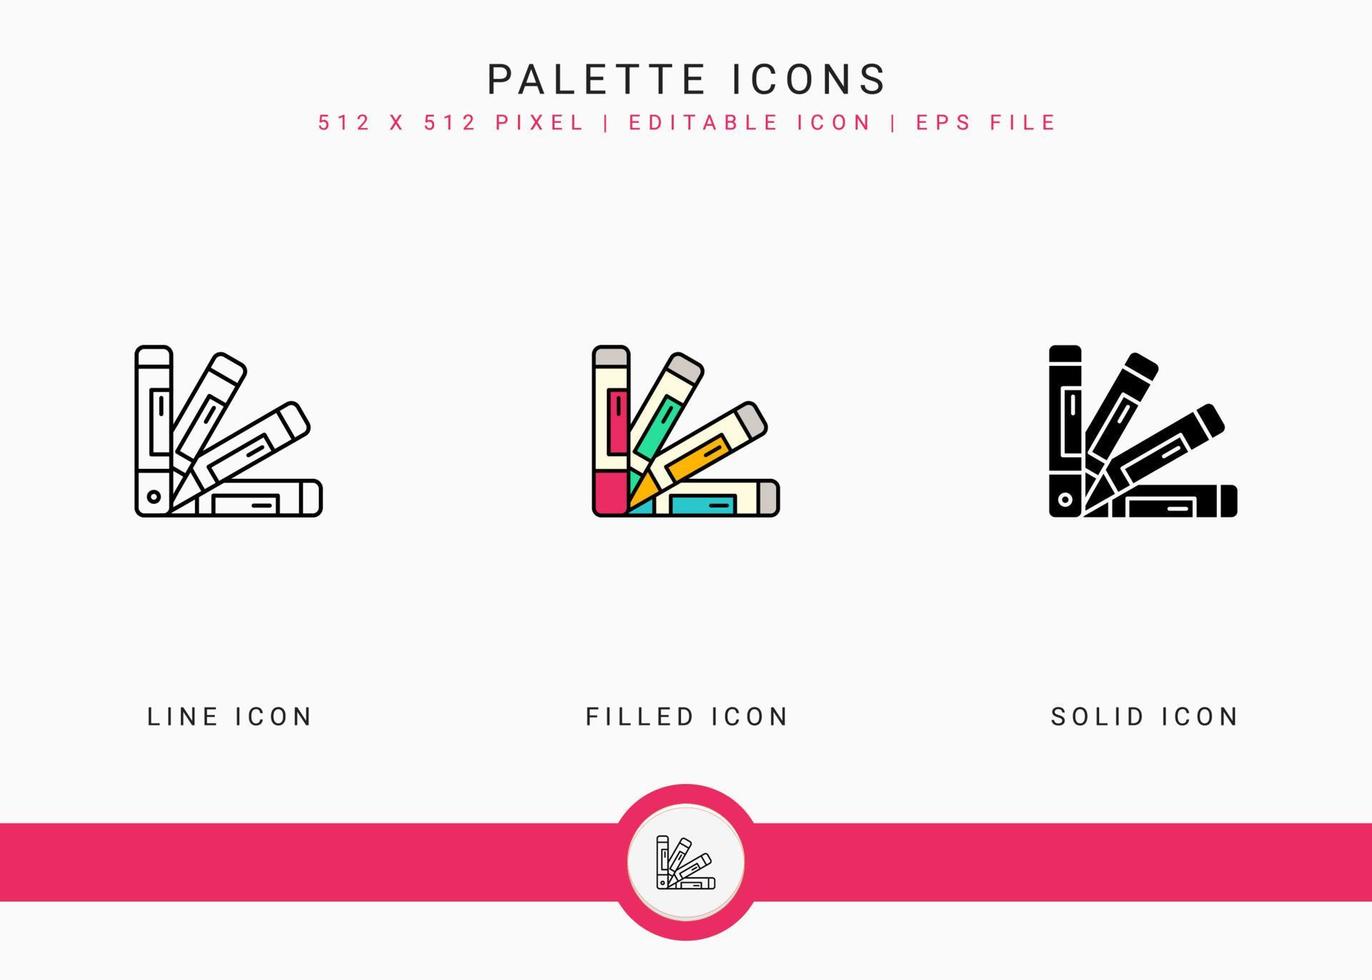 Palette icons set vector illustration with solid icon line style. Color brush art concept. Editable stroke icon on isolated background for web design, user interface, and mobile application